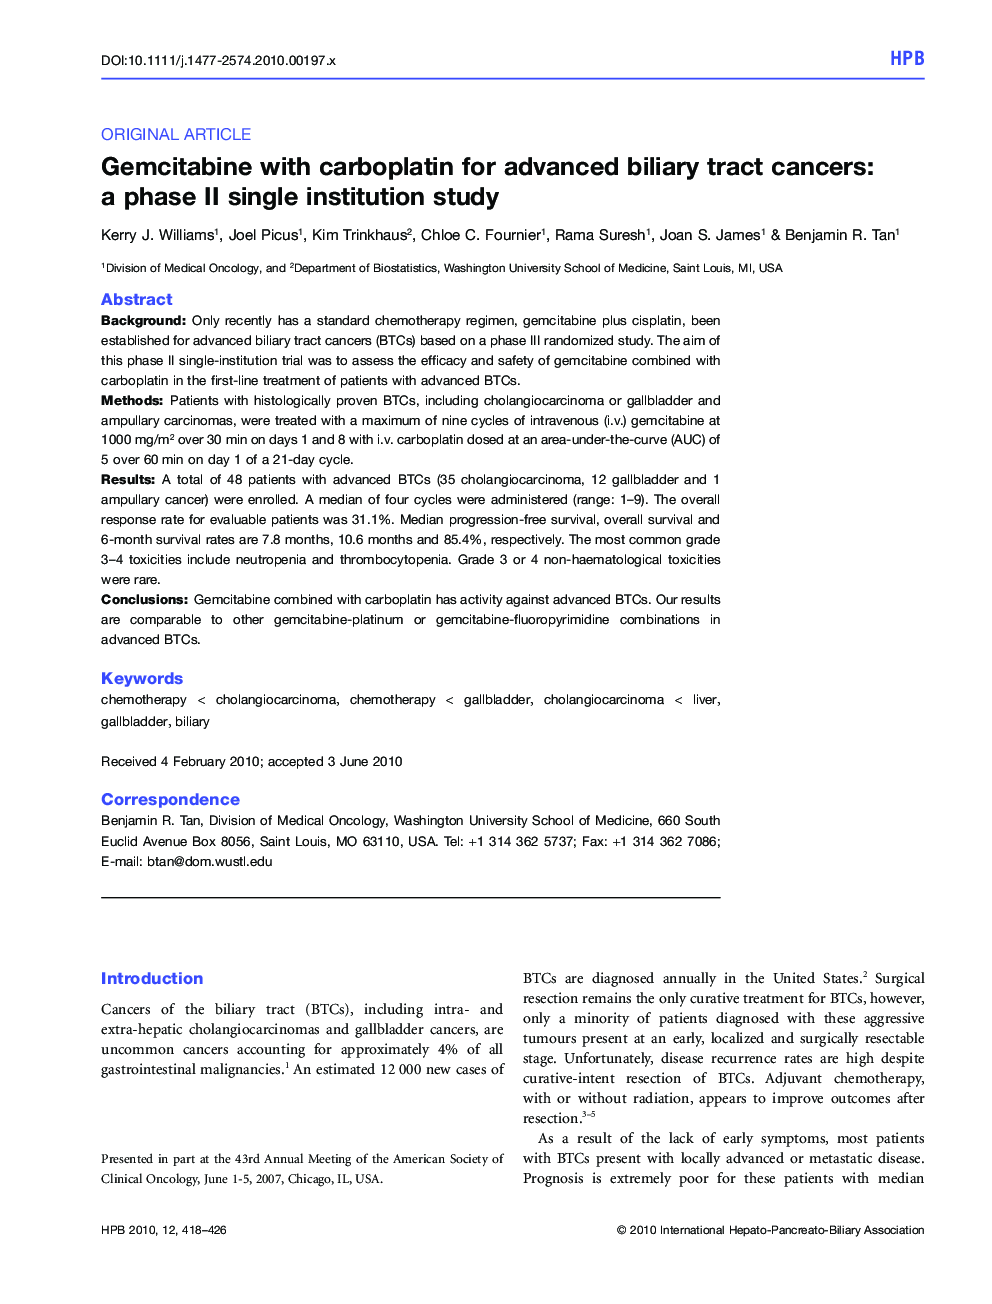 Gemcitabine with carboplatin for advanced biliary tract cancers: a phase II single institution study